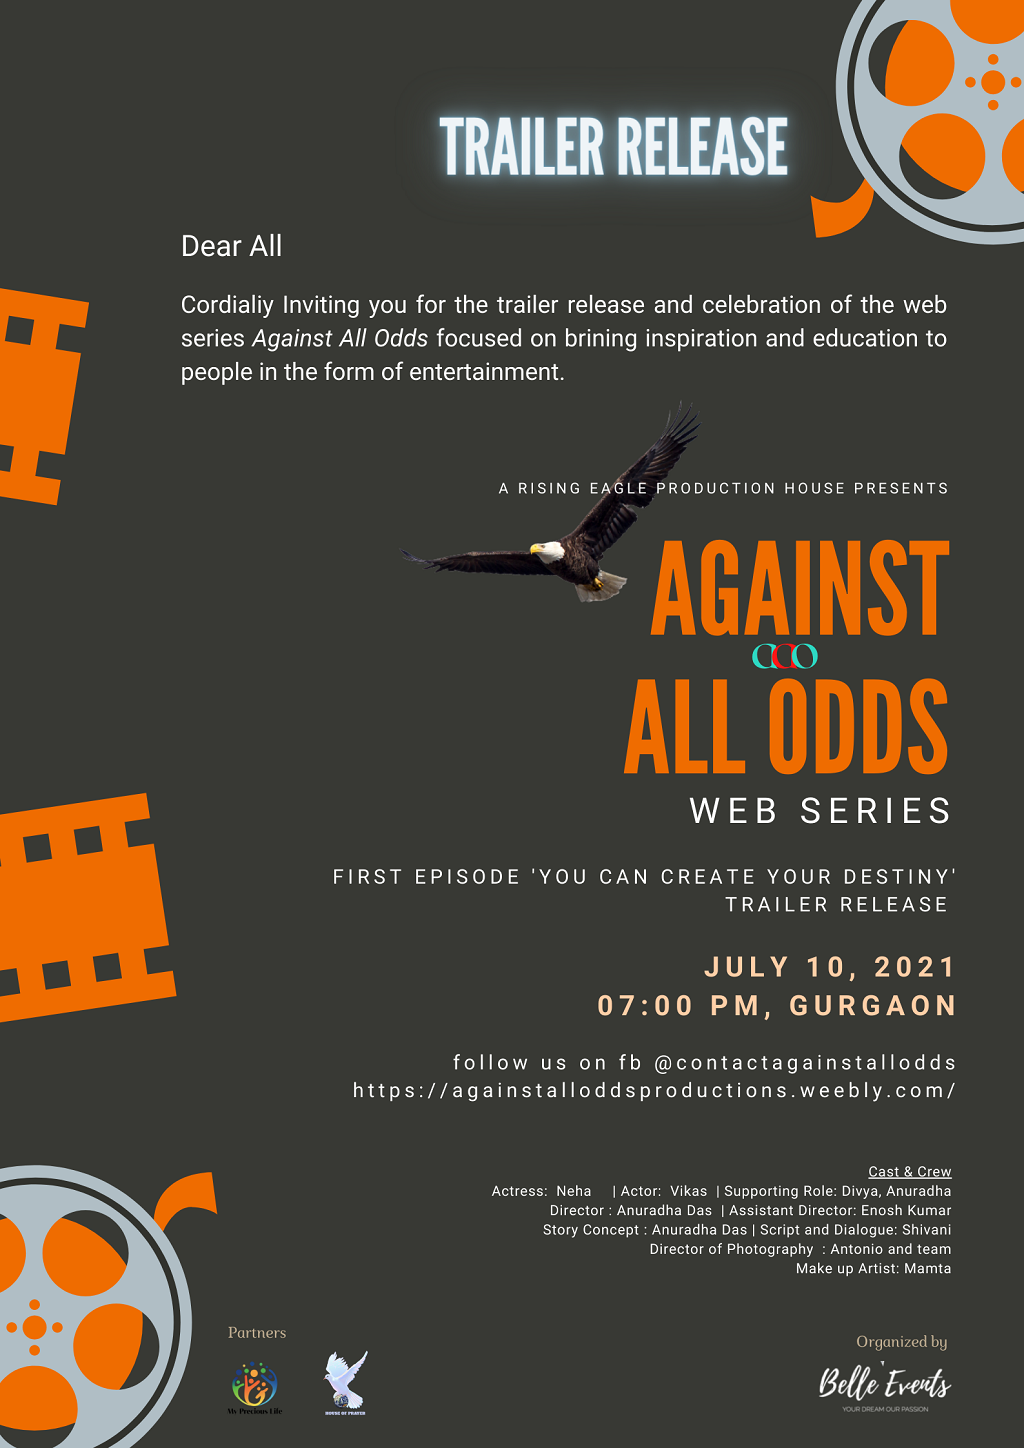 AGAINST ALL ODDS – WEB SERIES BY ‘A RISING EAGLE PRODUCTION HOUSE’